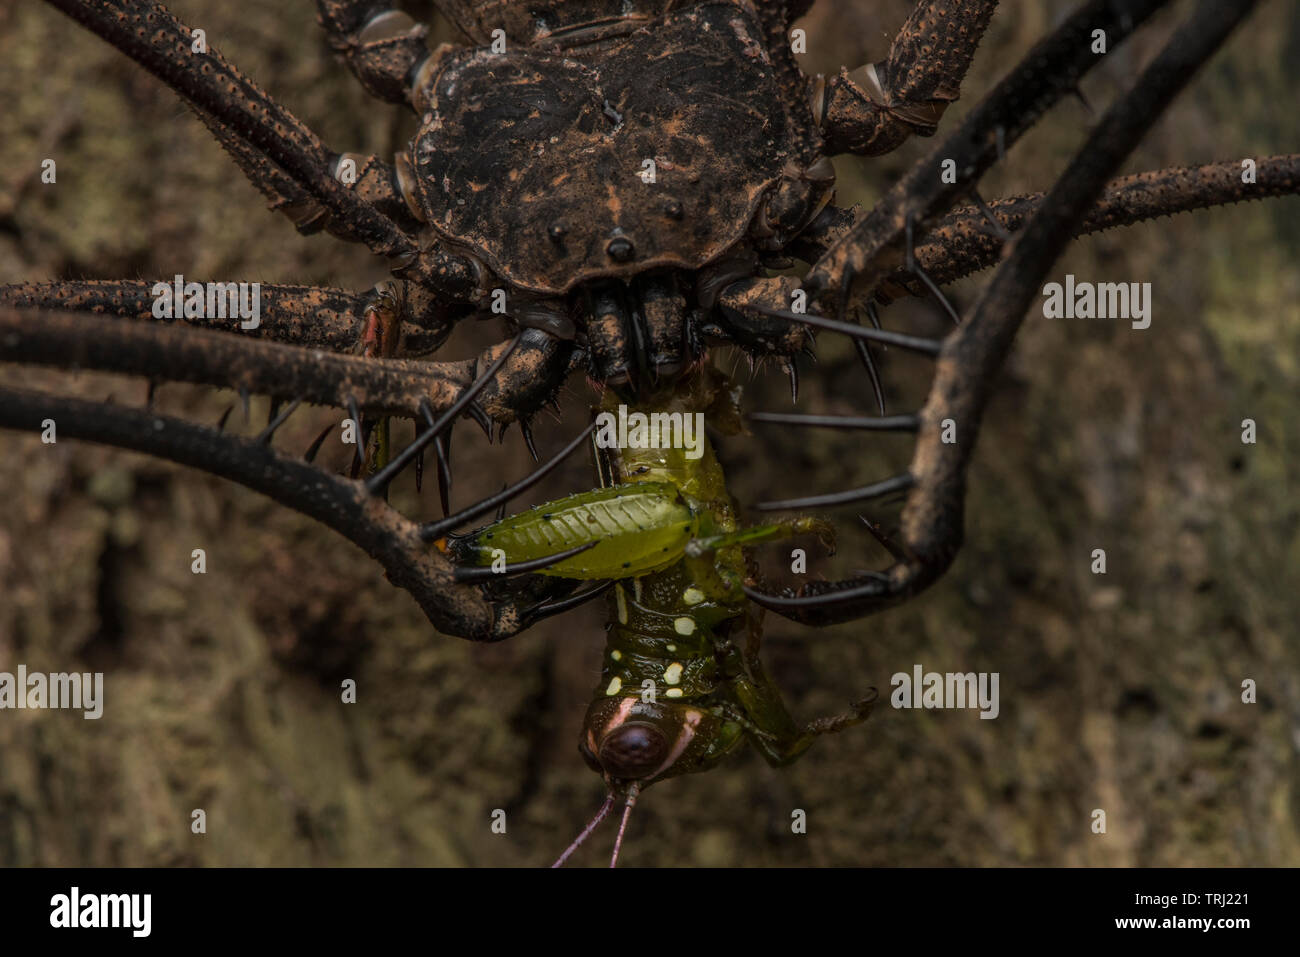 An Amblypygid or tailless whip scorpion feeds on a small grasshopper in the Ecuadorian rainforest. Stock Photo